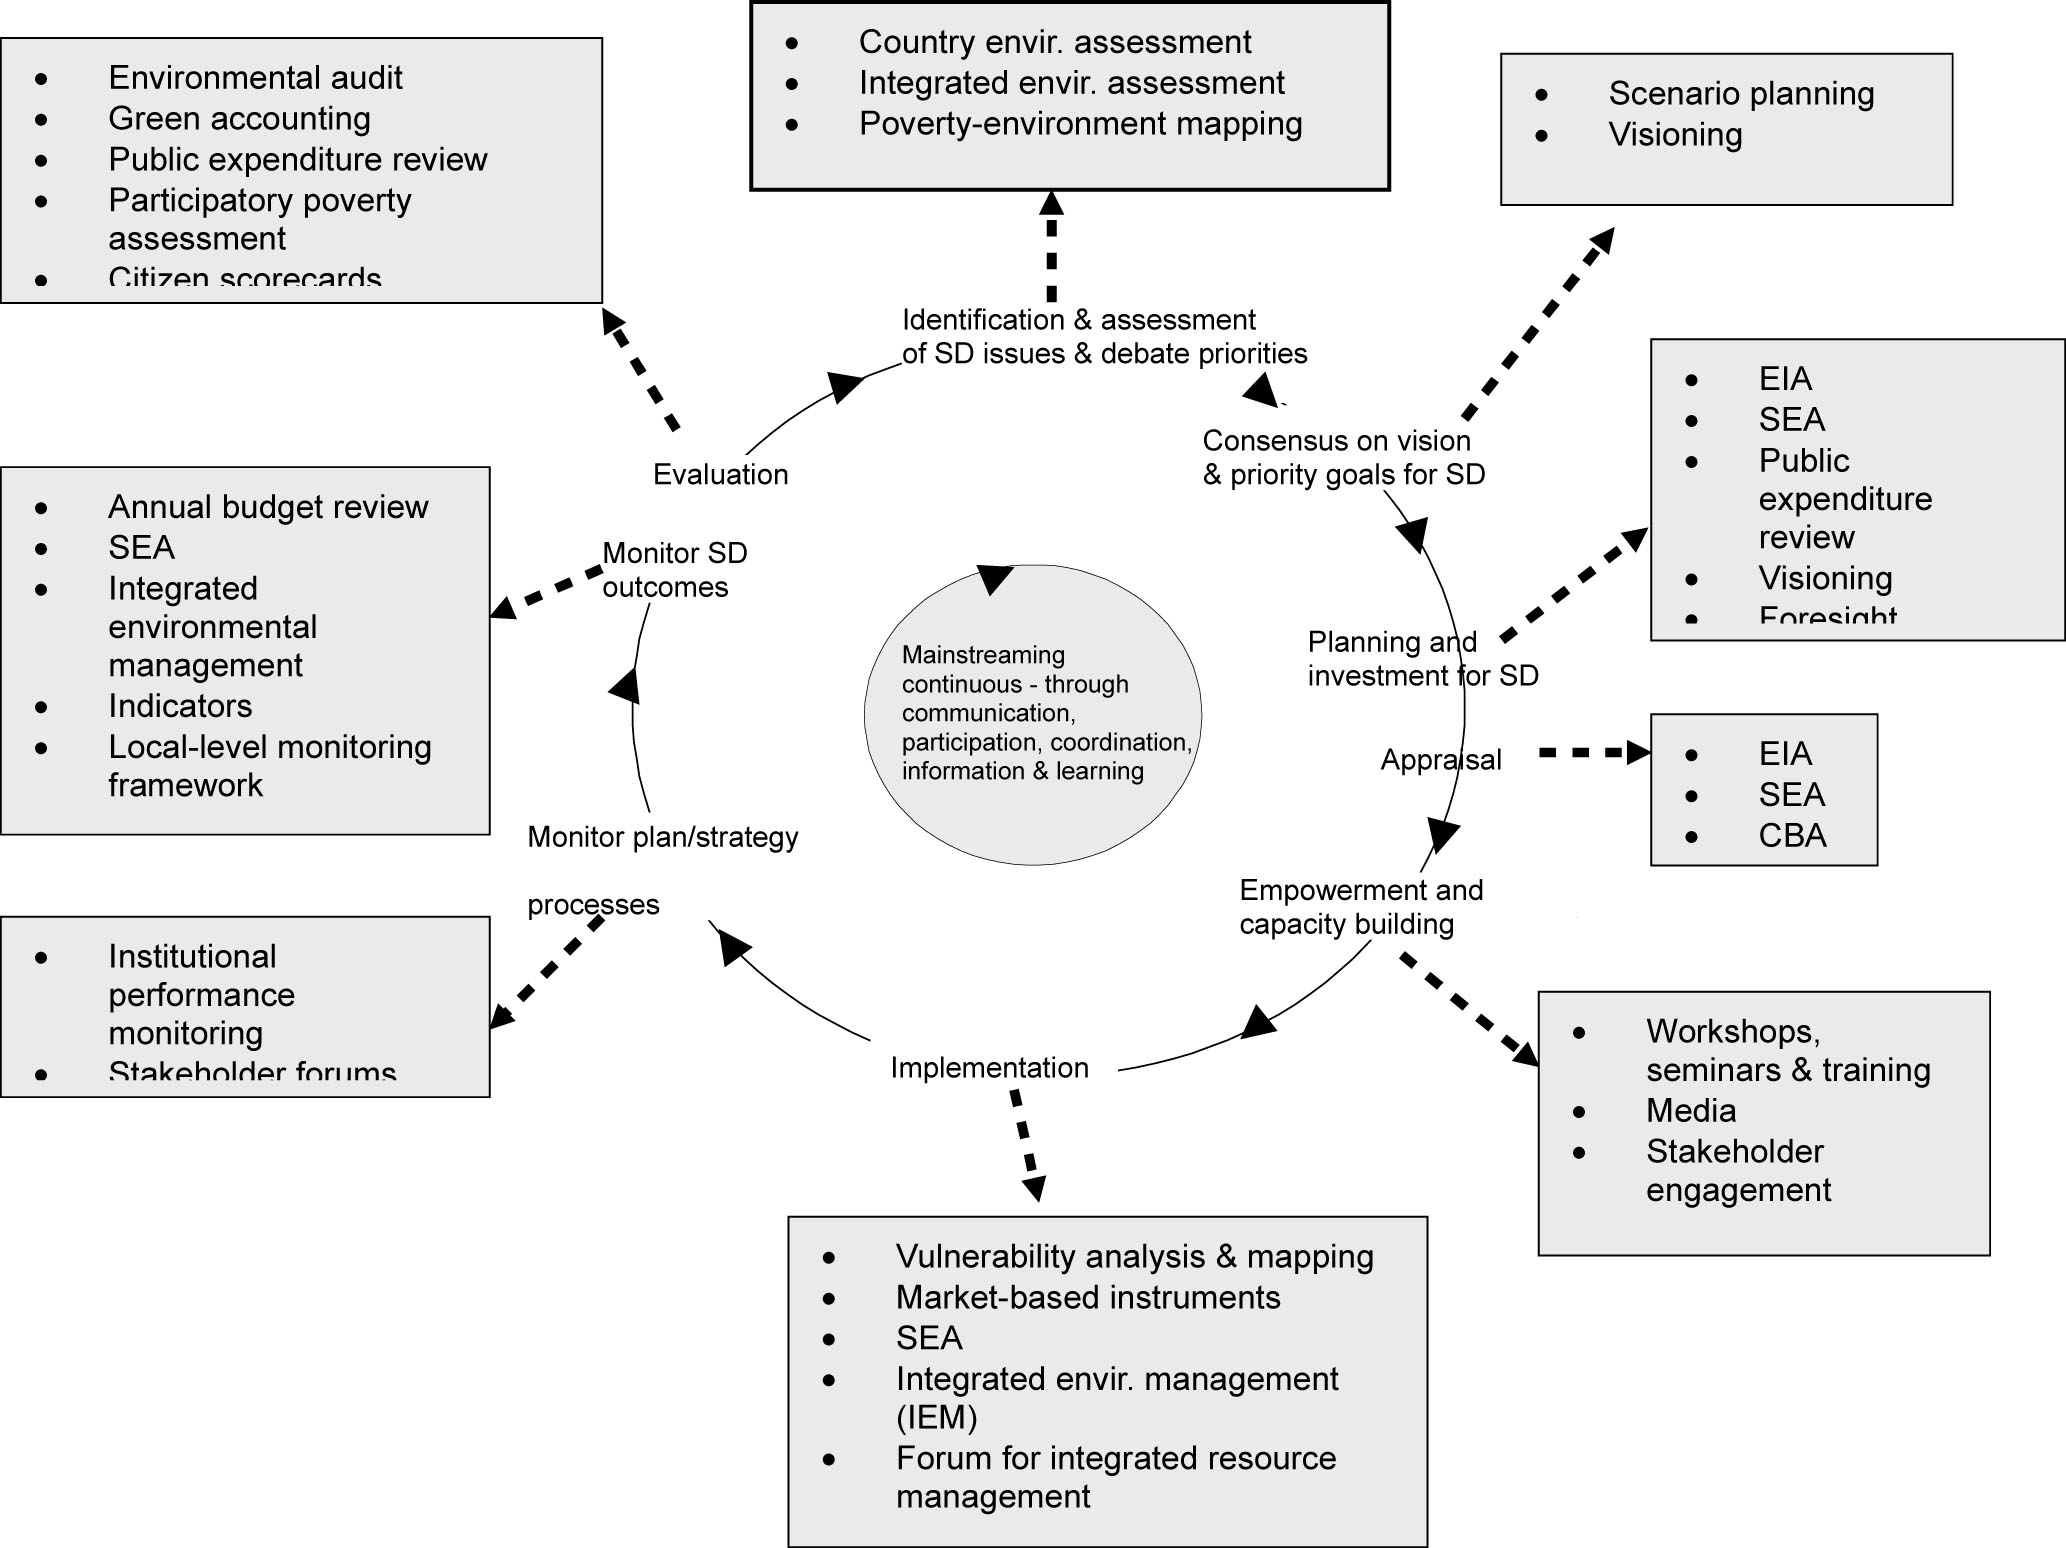 Linking mainstreaming to the continuous improvement approach to managing policy, strategy and planning processes 